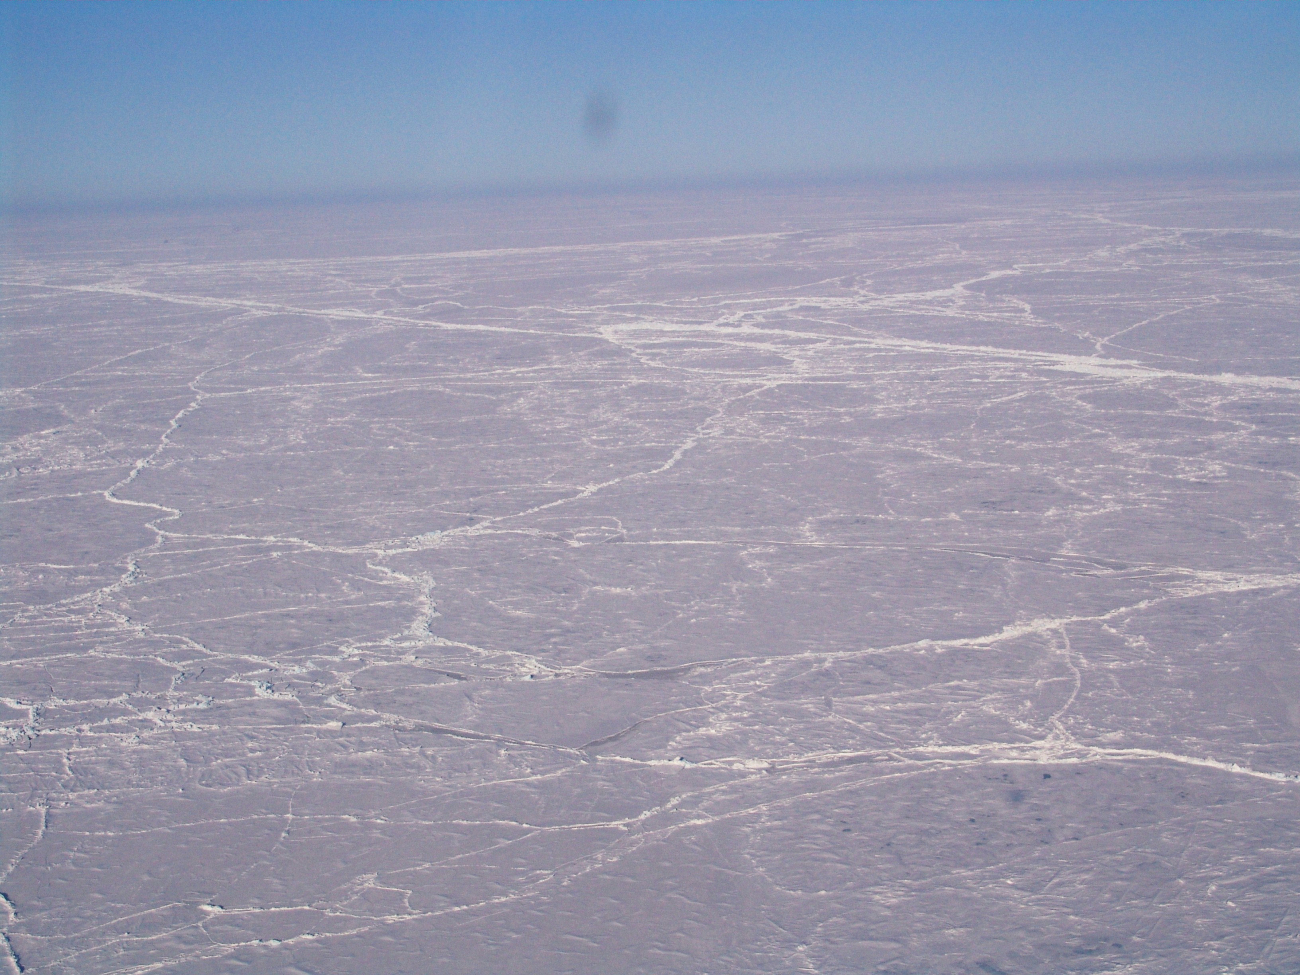 Pack ice with pressure ridges criss-crossing in seeming random fashion